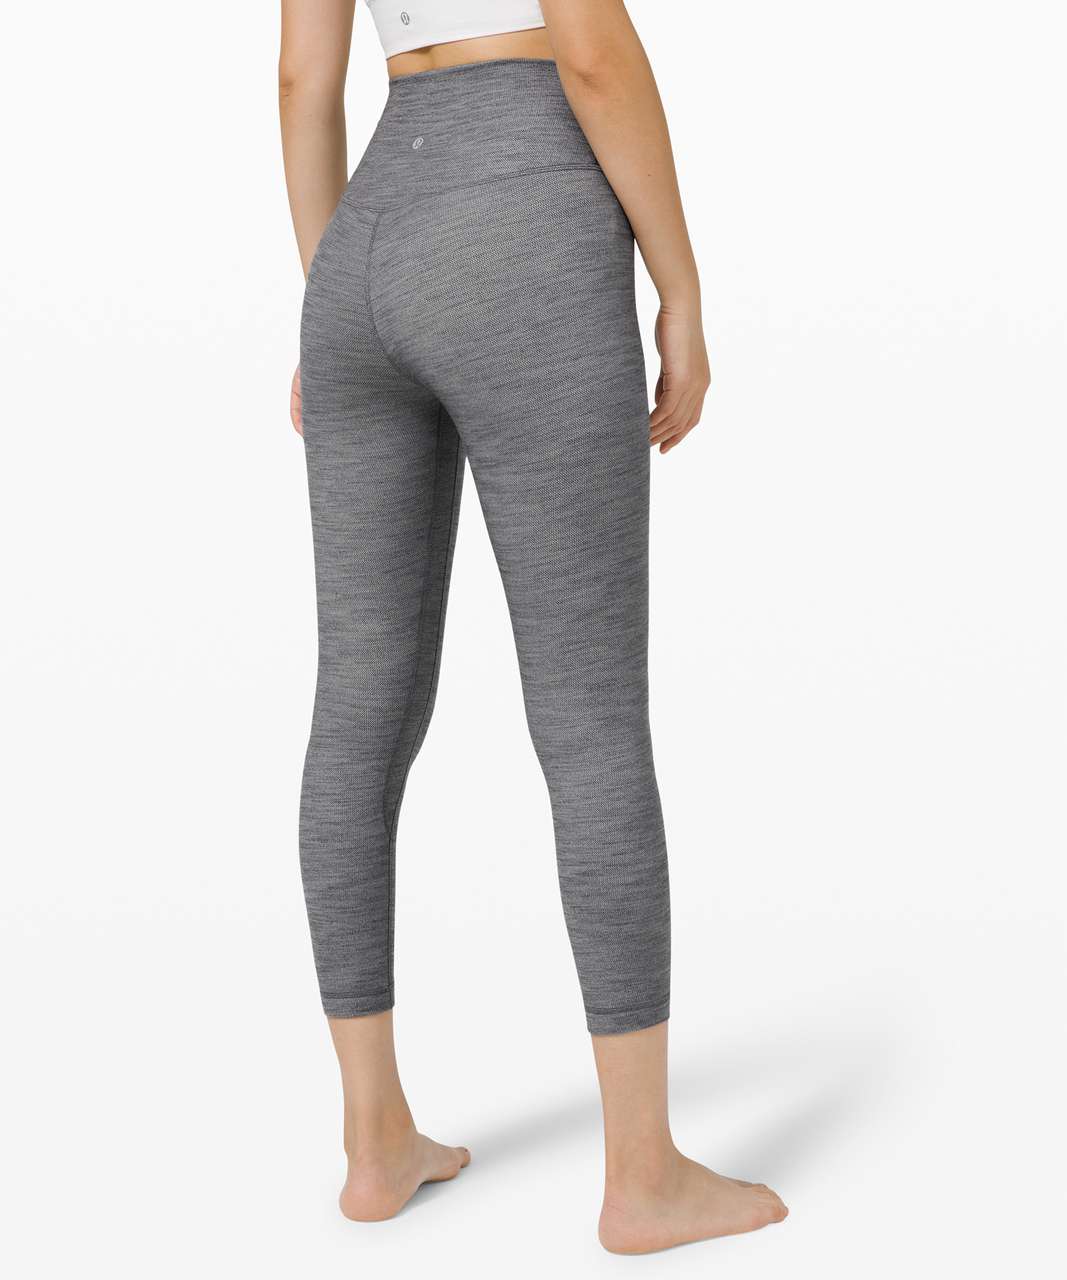 Do the Heathered Herringbone Aligns run small? This model is wearing a size  6 and I thought she was a 4 in aligns.. want to order from the store but  its final